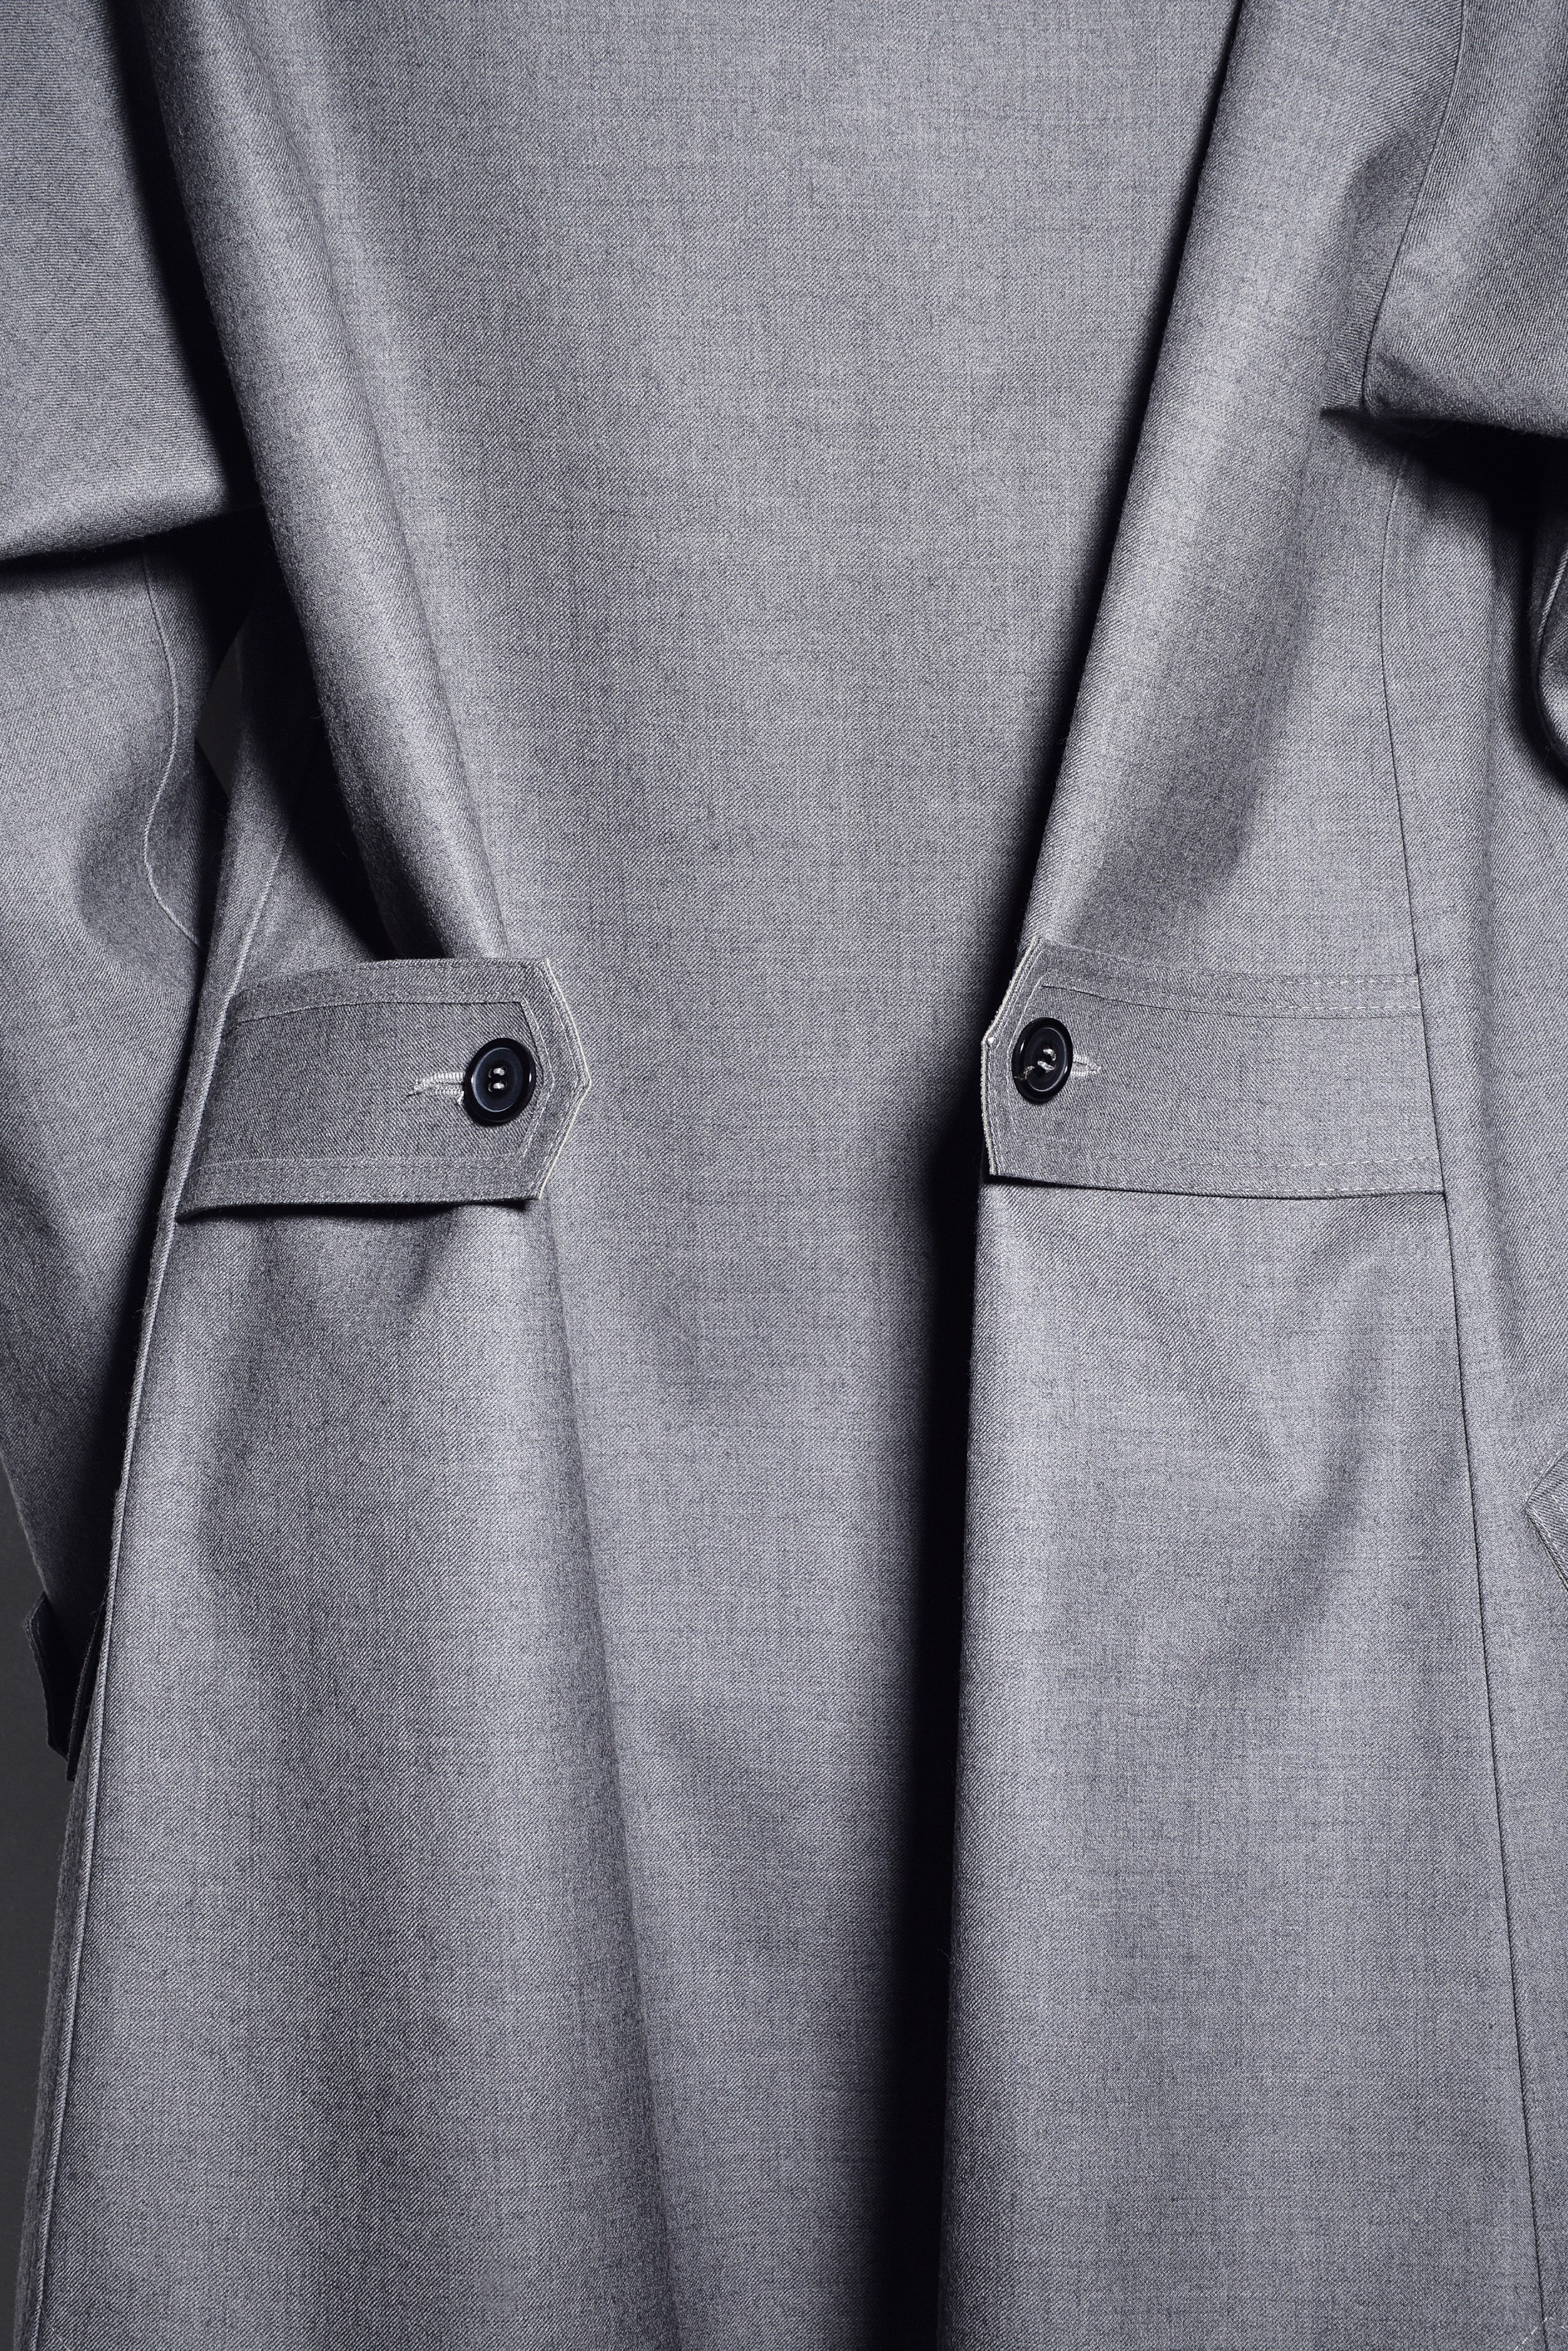 Introducing MACKINTOSH and Maison Margiela’s Two Exclusive Trench Coats